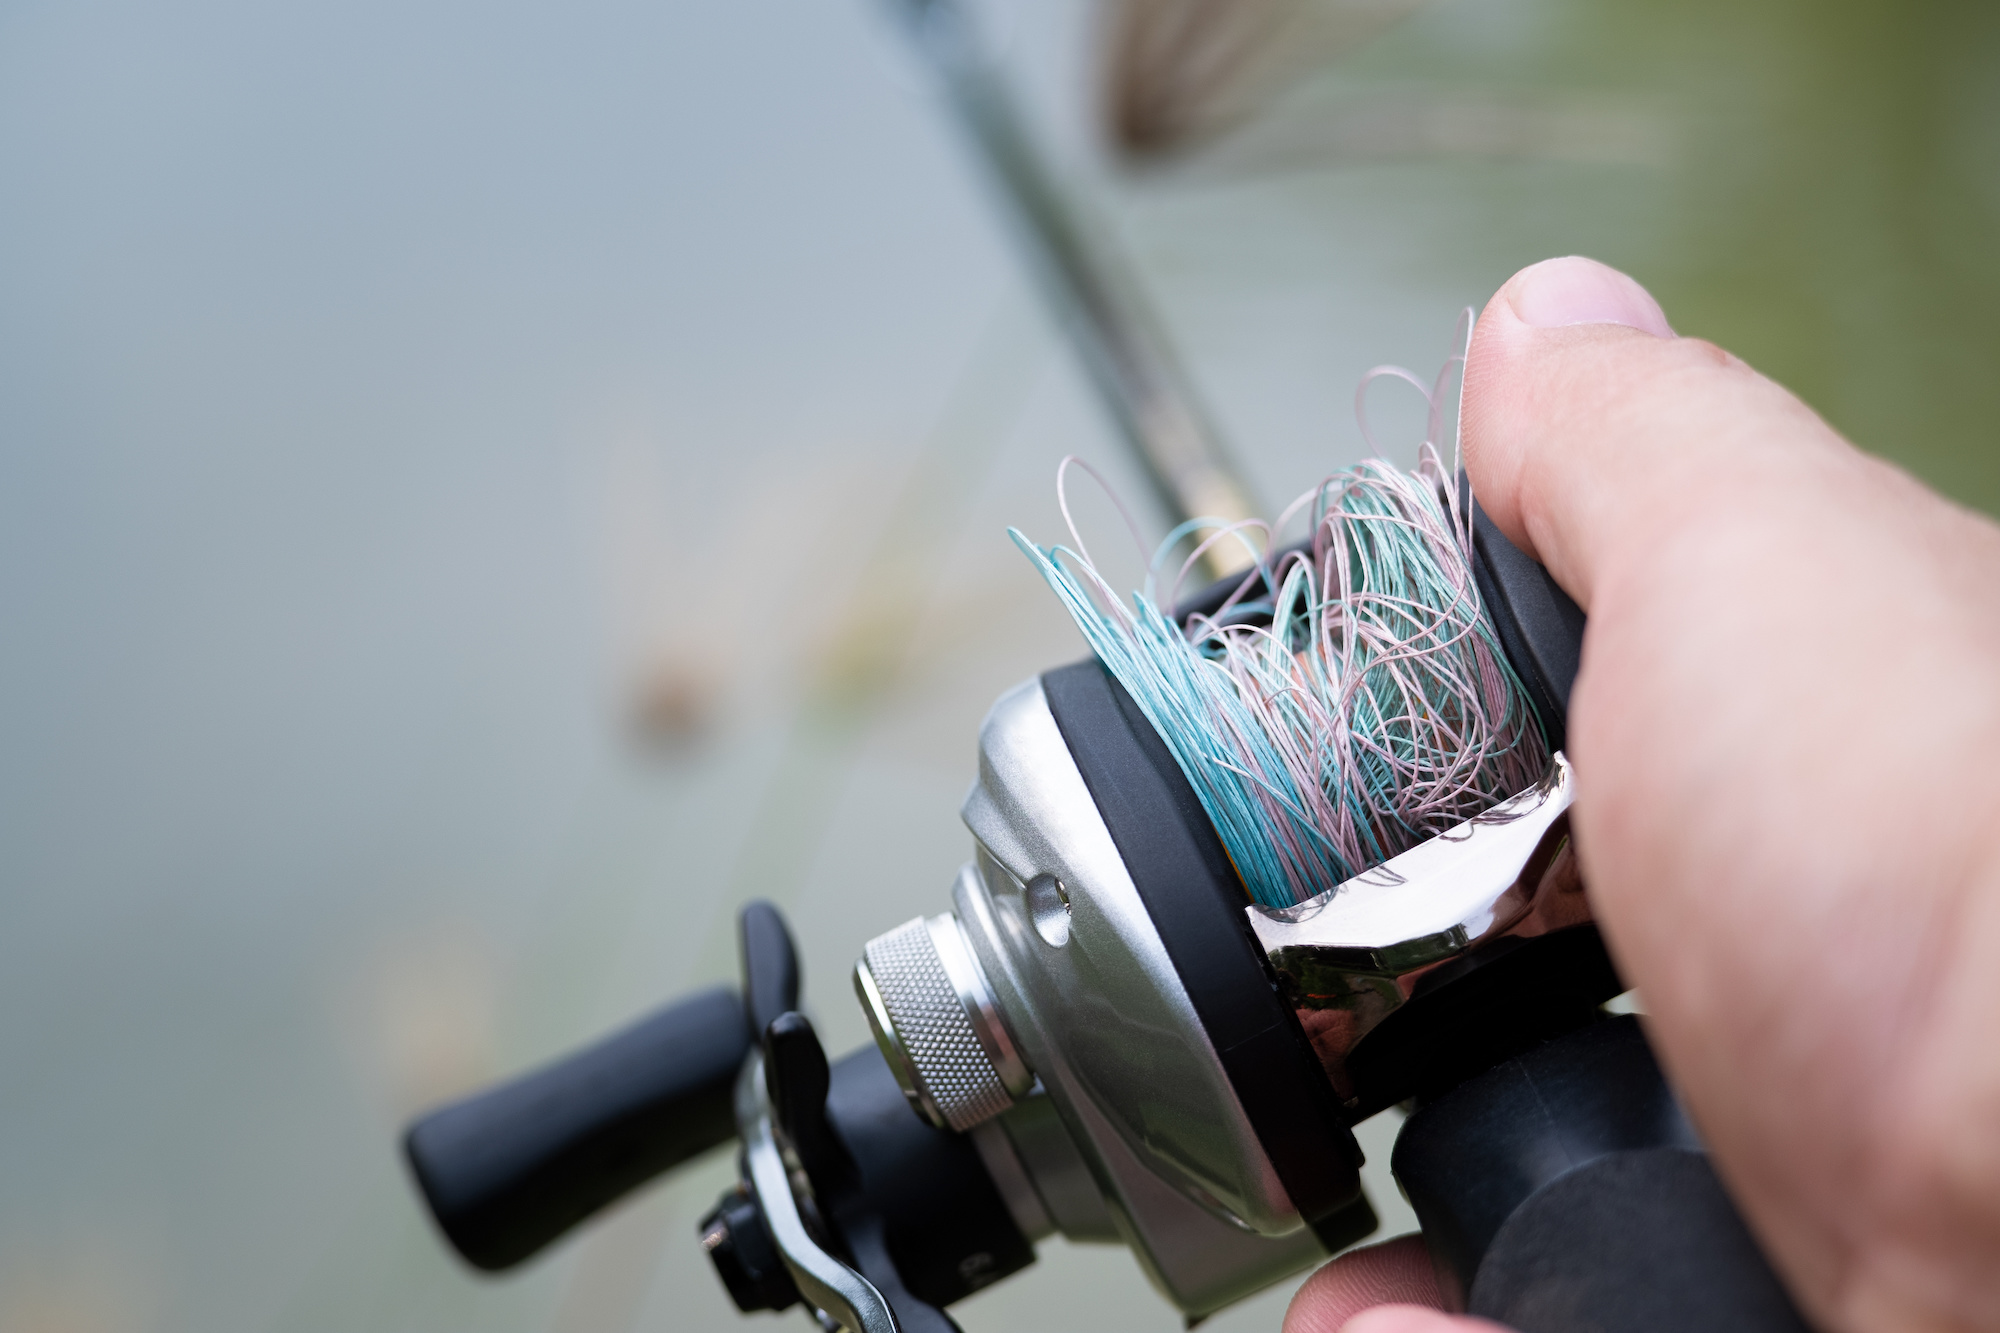 https://www.outdoorlife.com/wp-content/uploads/2023/11/14/how_to_avoid_tangles_fishing_3.jpeg?strip=all&quality=95